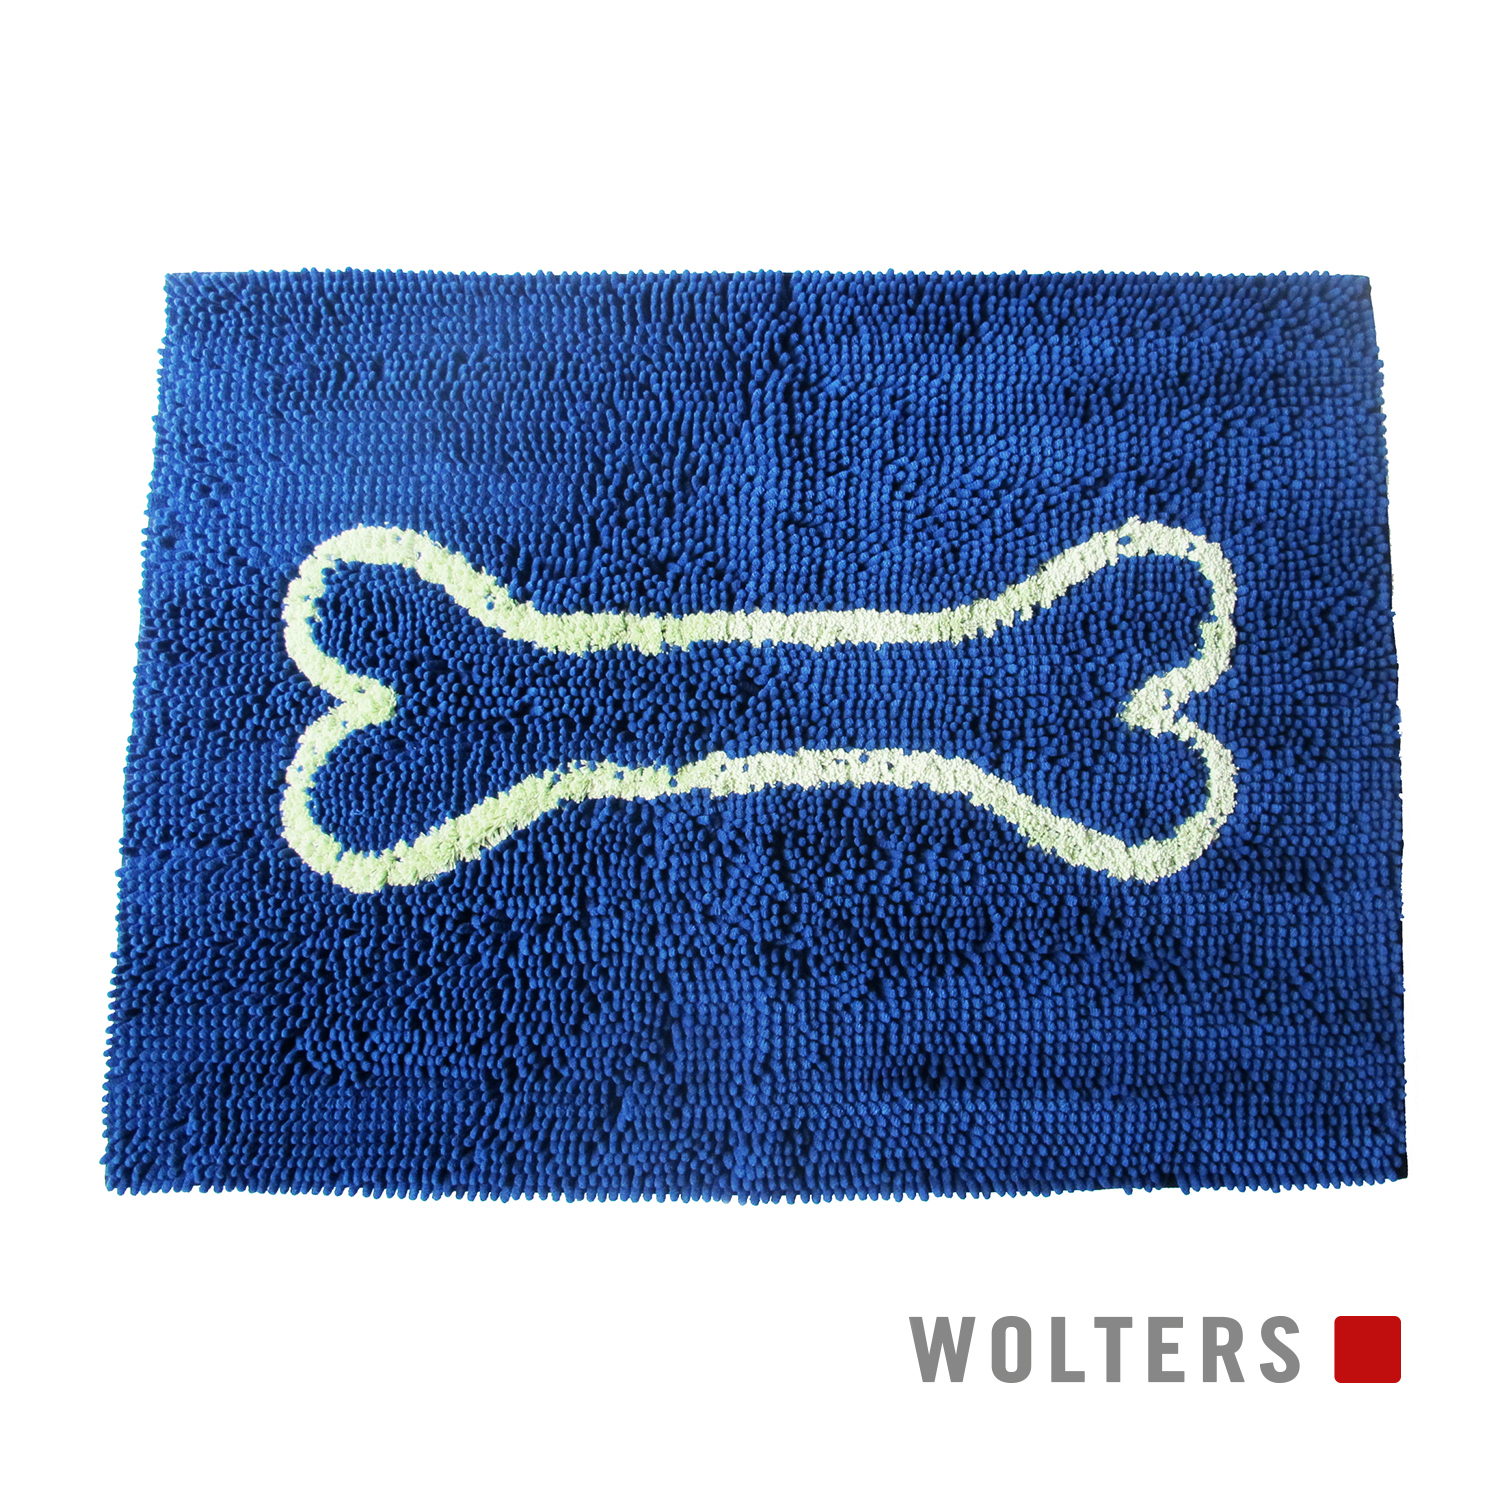 Wolters Dirty Dog Doormat - Special Edition, marine/lime